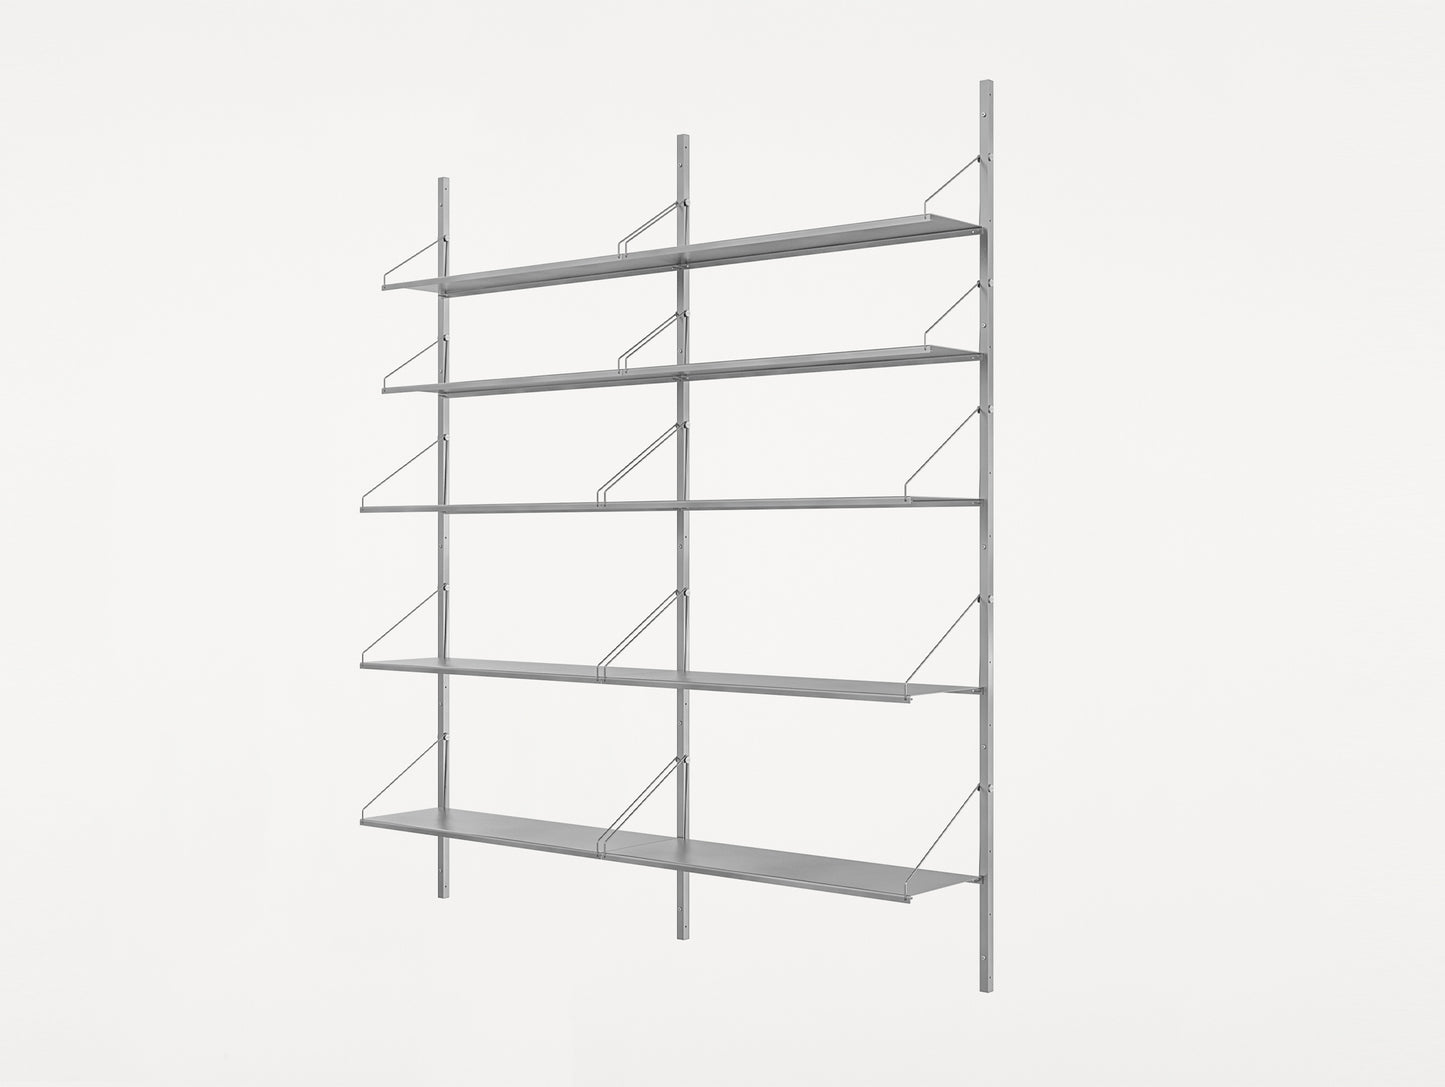 Shelf Library Stainless Steel by Frama - H1852 cm / Double Section (w80 shelves)